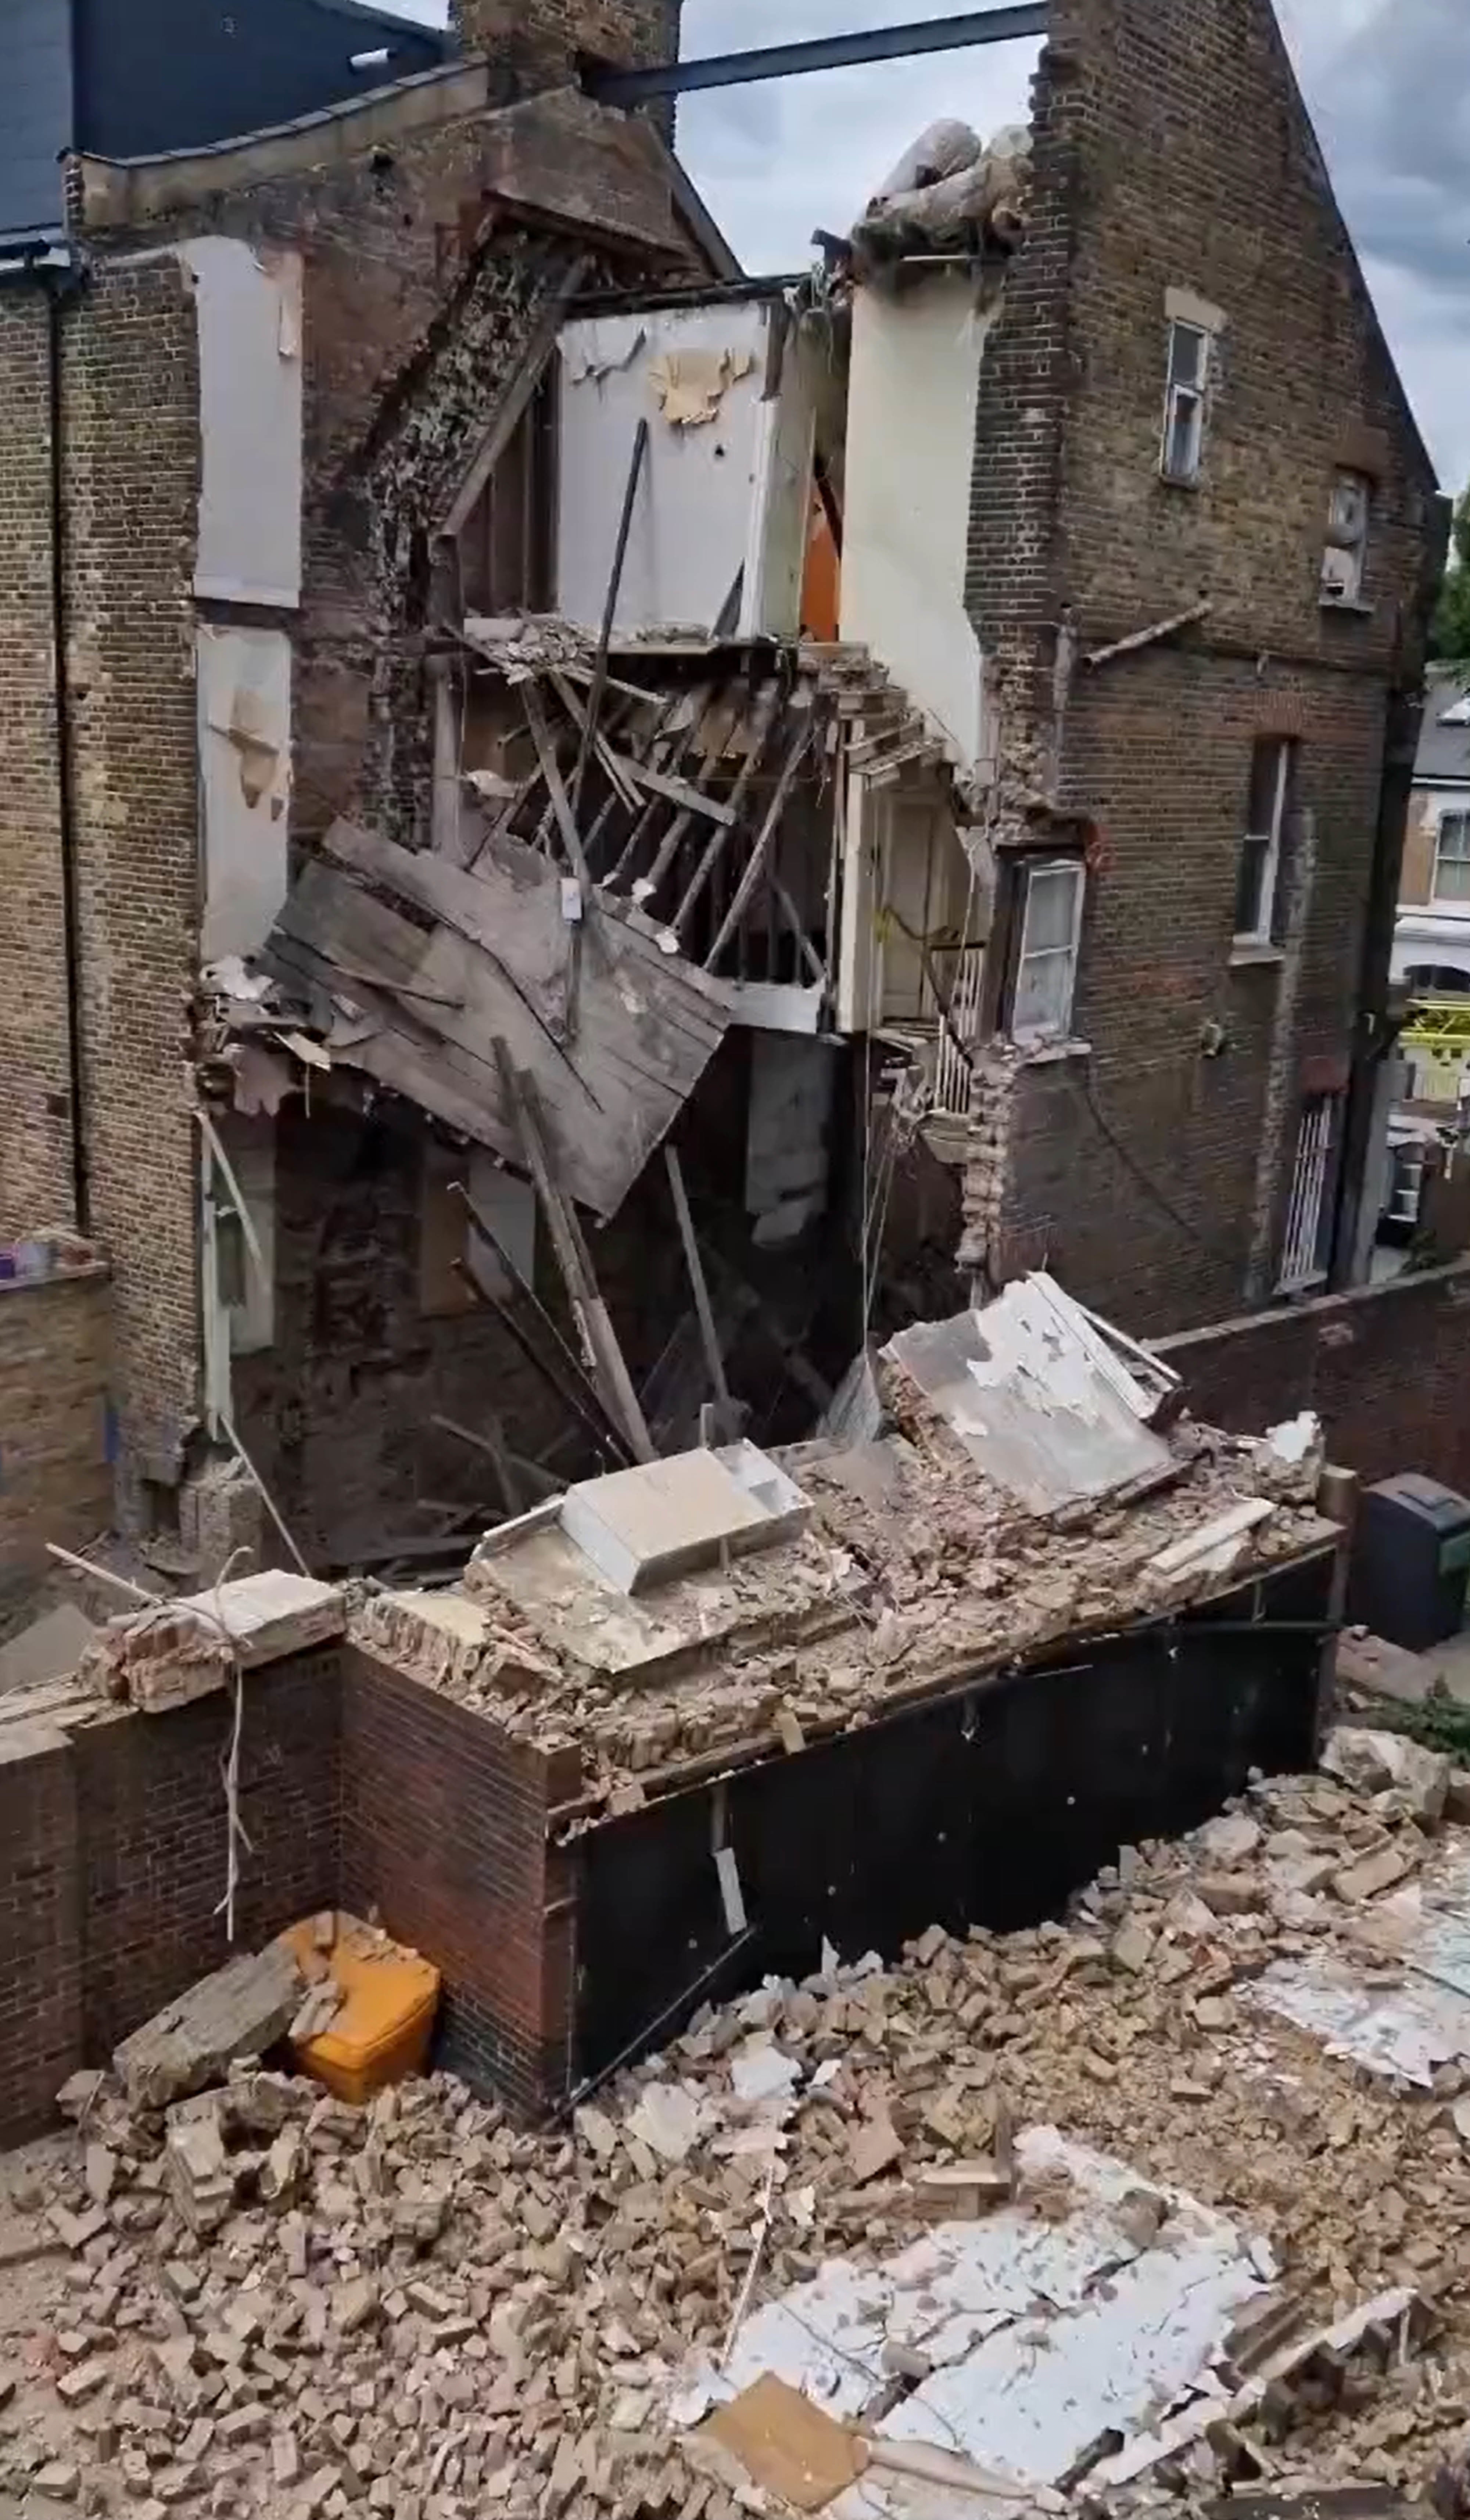 An entire three-storey house collapsed in Hackney, London